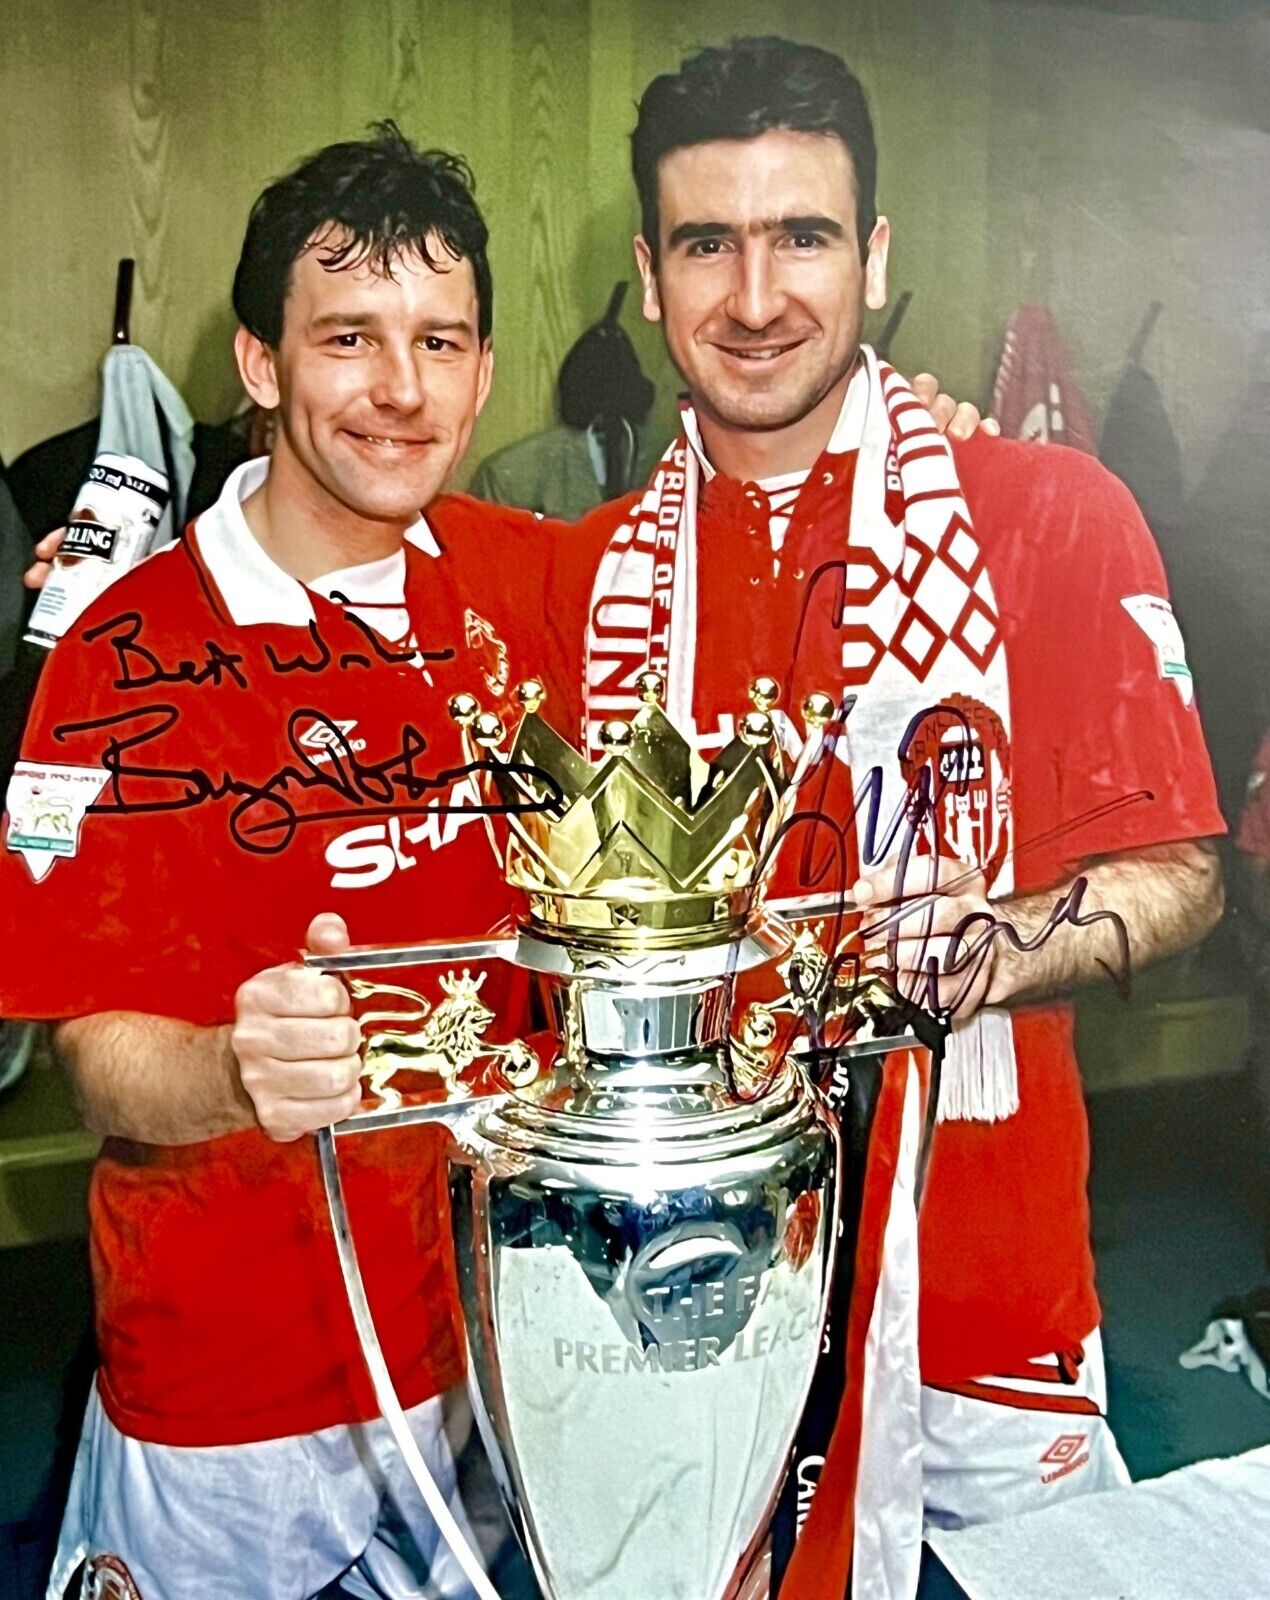 Hand Signed 8x10 photo ERIC CANTONA BRYAN ROBSON Manchester United FOOTBALL ICON